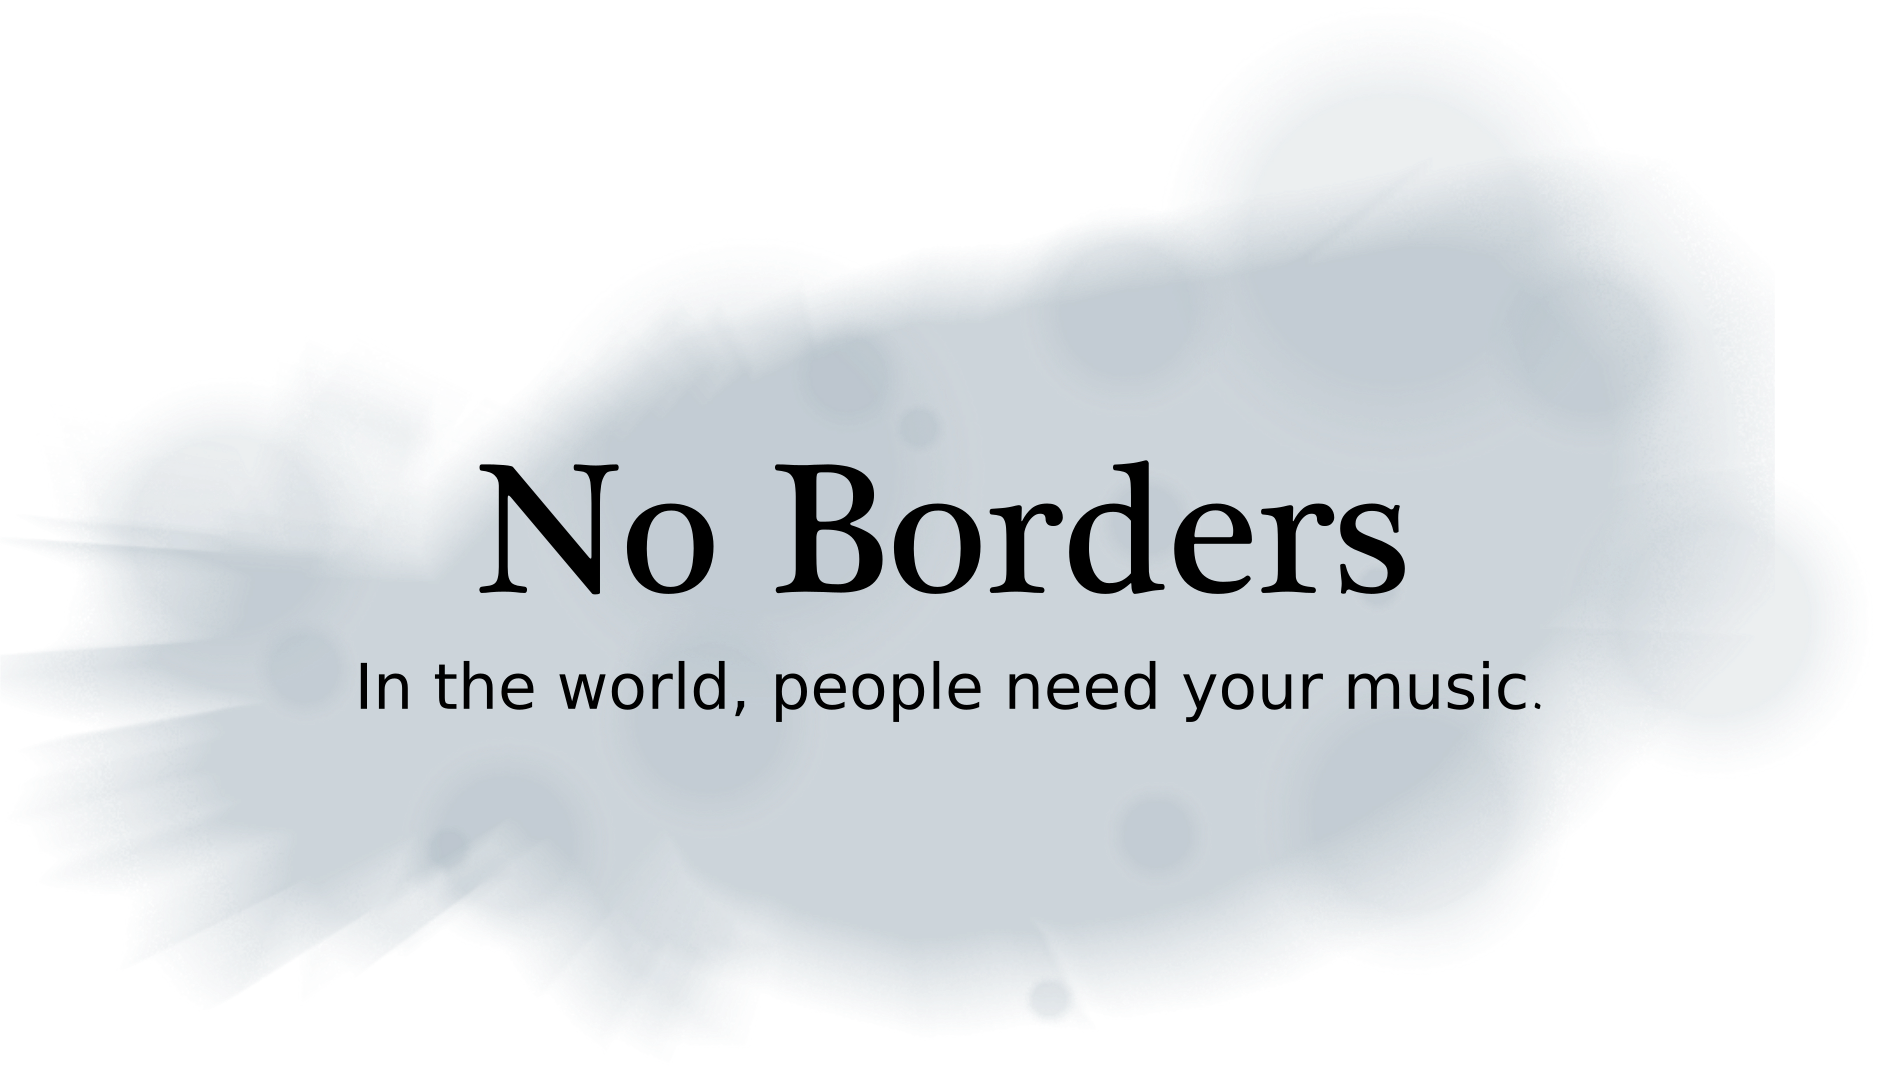 No borders. In the world, people need your music.